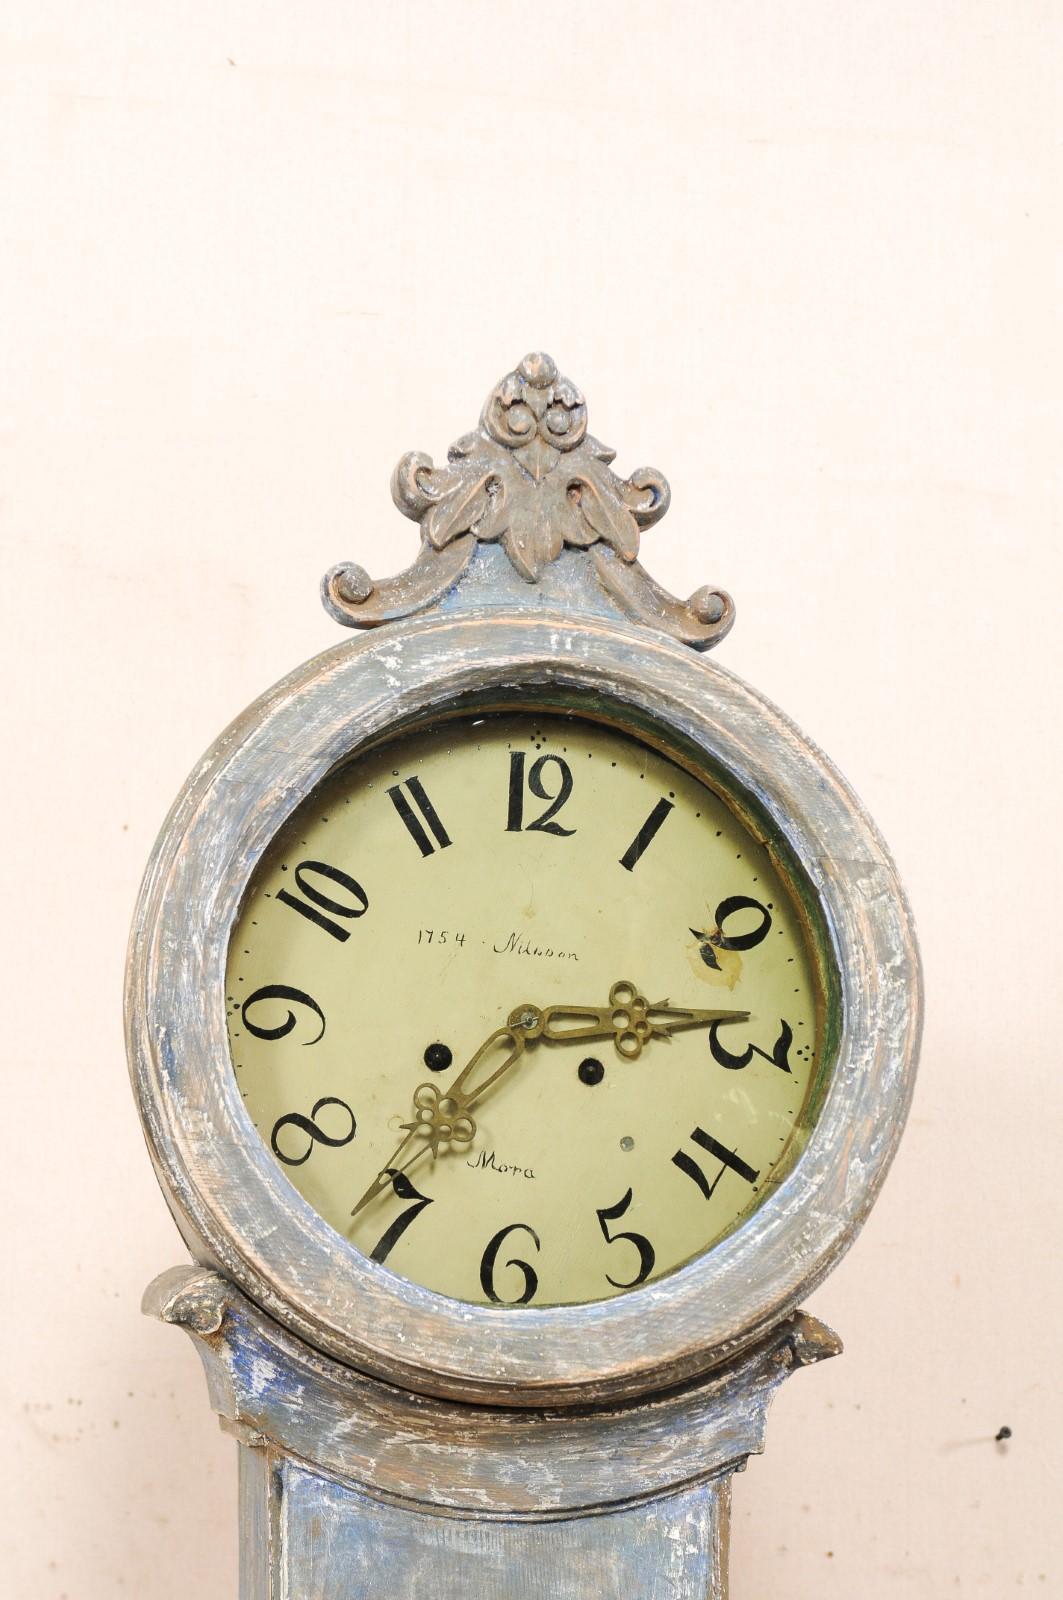 19th Century 19th C. Swedish Fryksdahl Floor Clock in Blue Hues with Nicely Carved Details